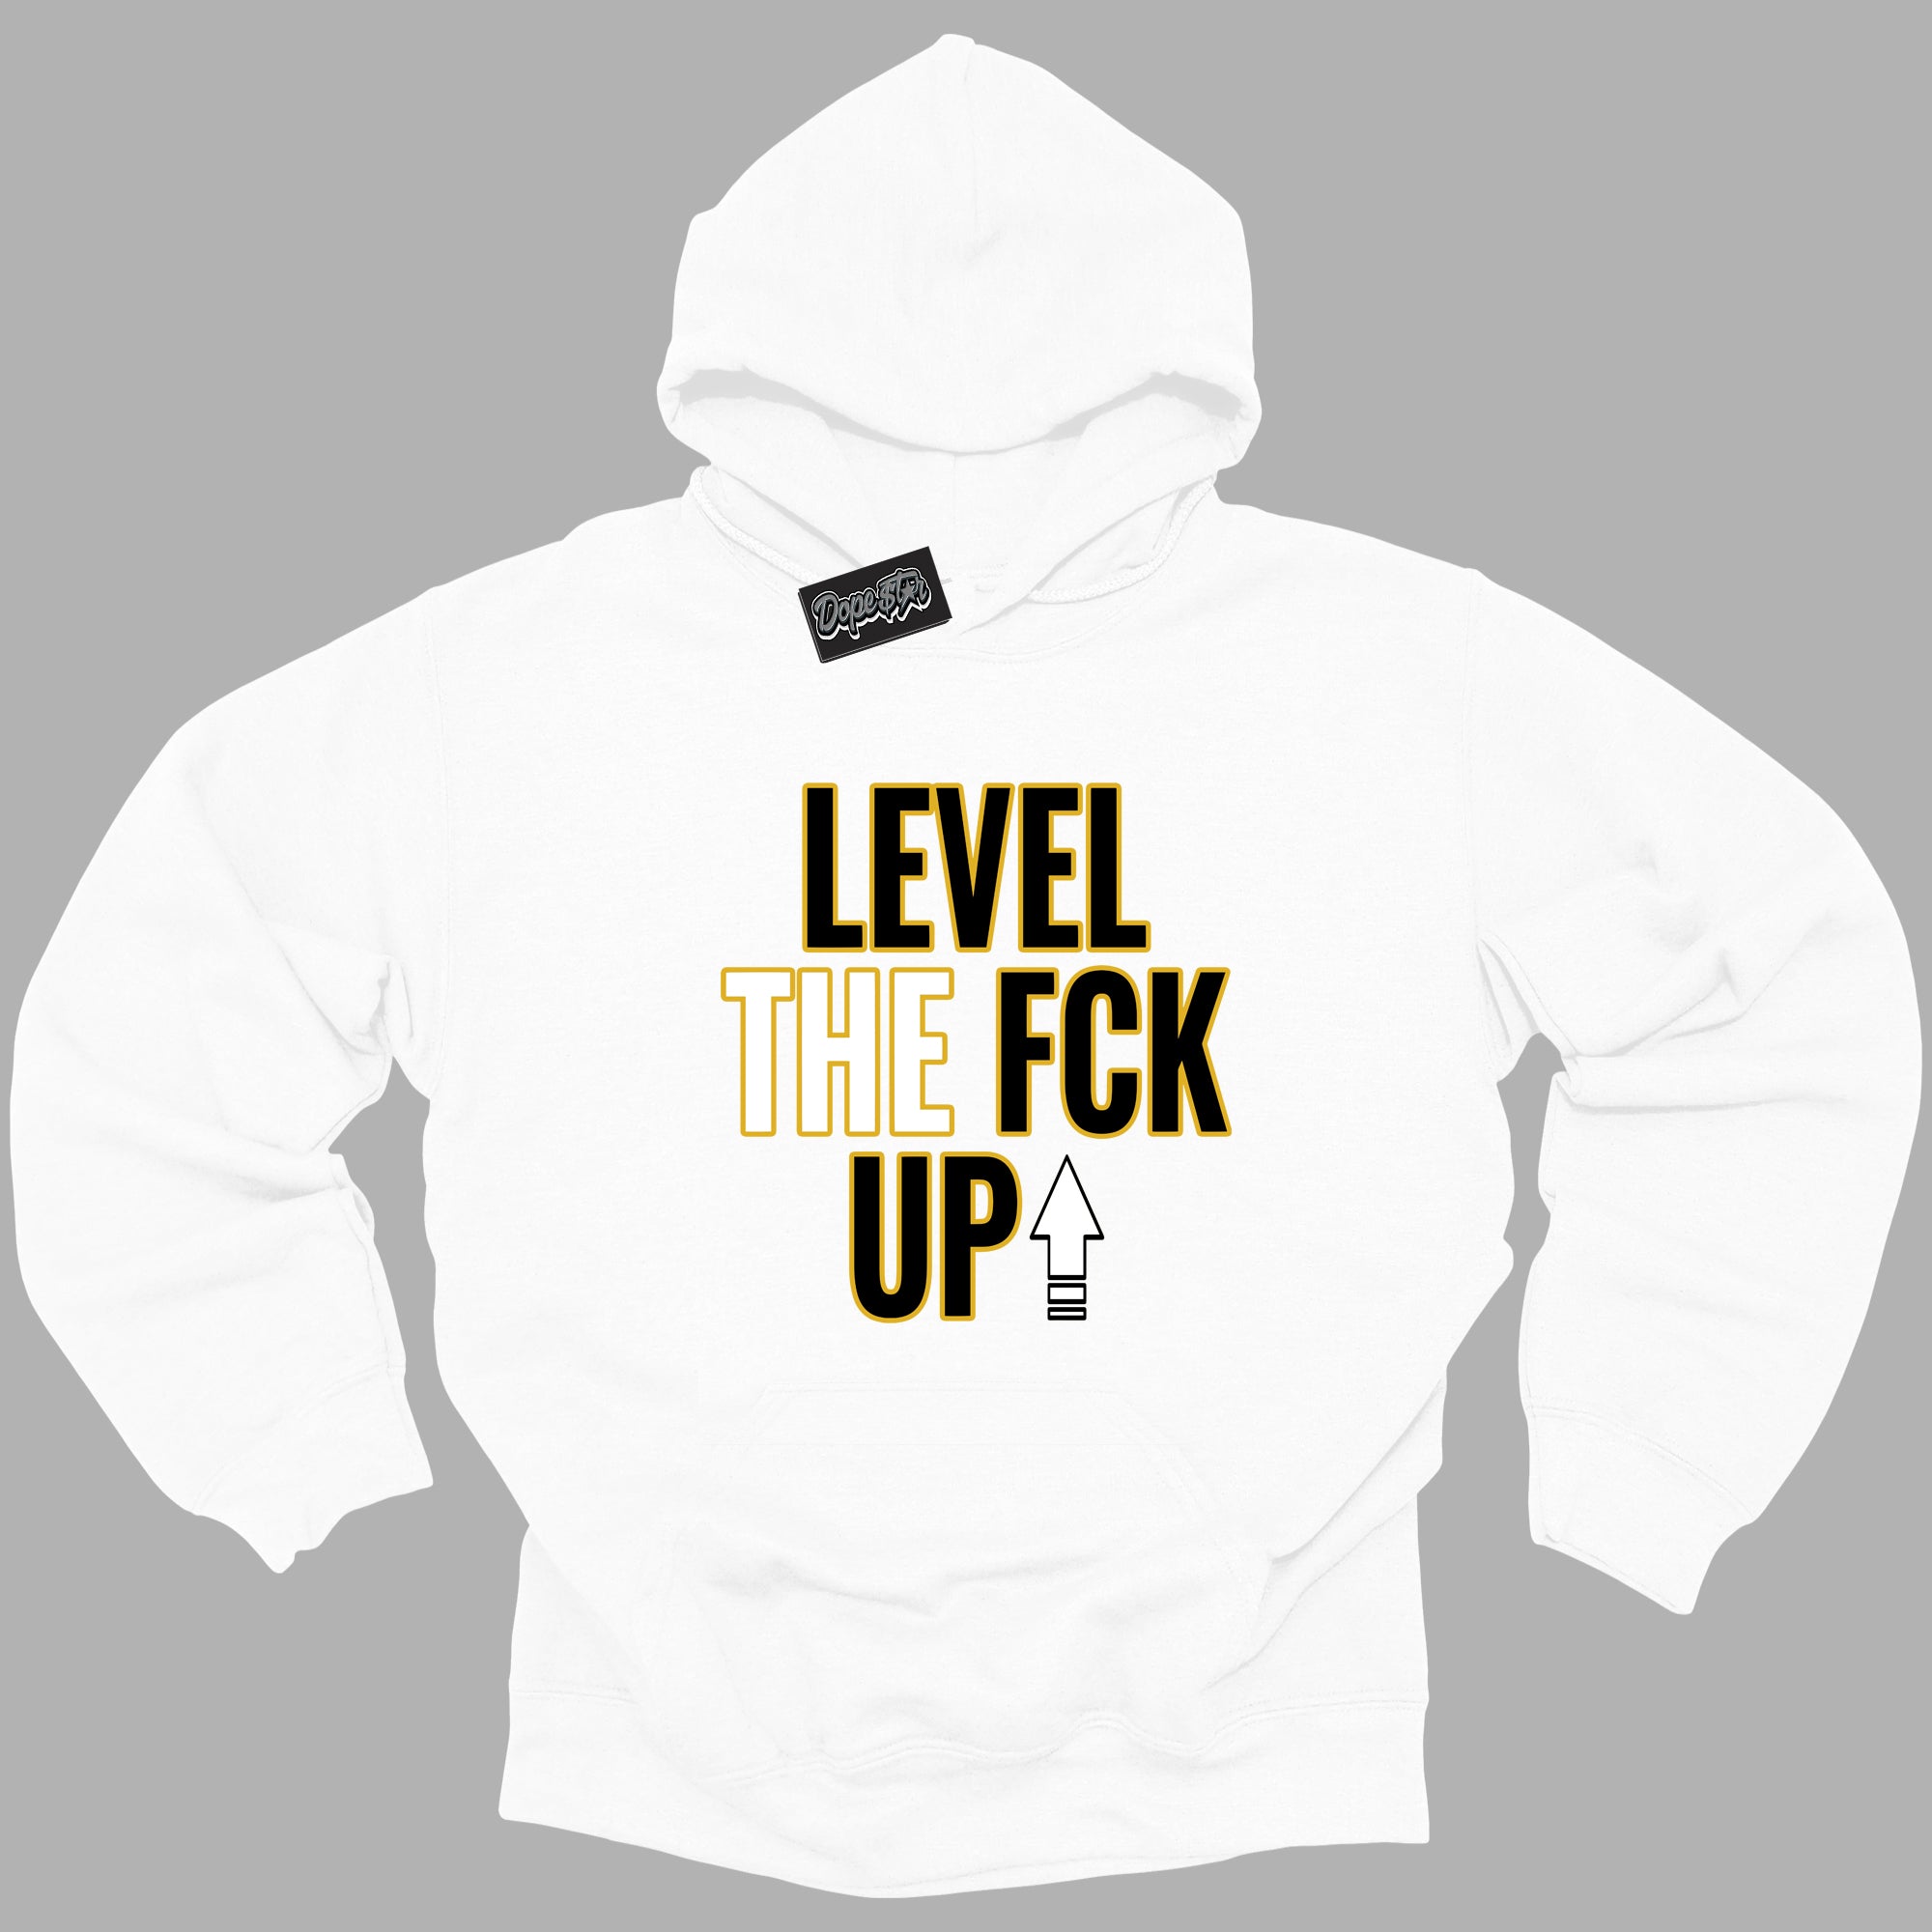 Cool White Hoodie with “ Level The Fck Up ”  design that Perfectly Matches Yellow Ochre 6s Sneakers.